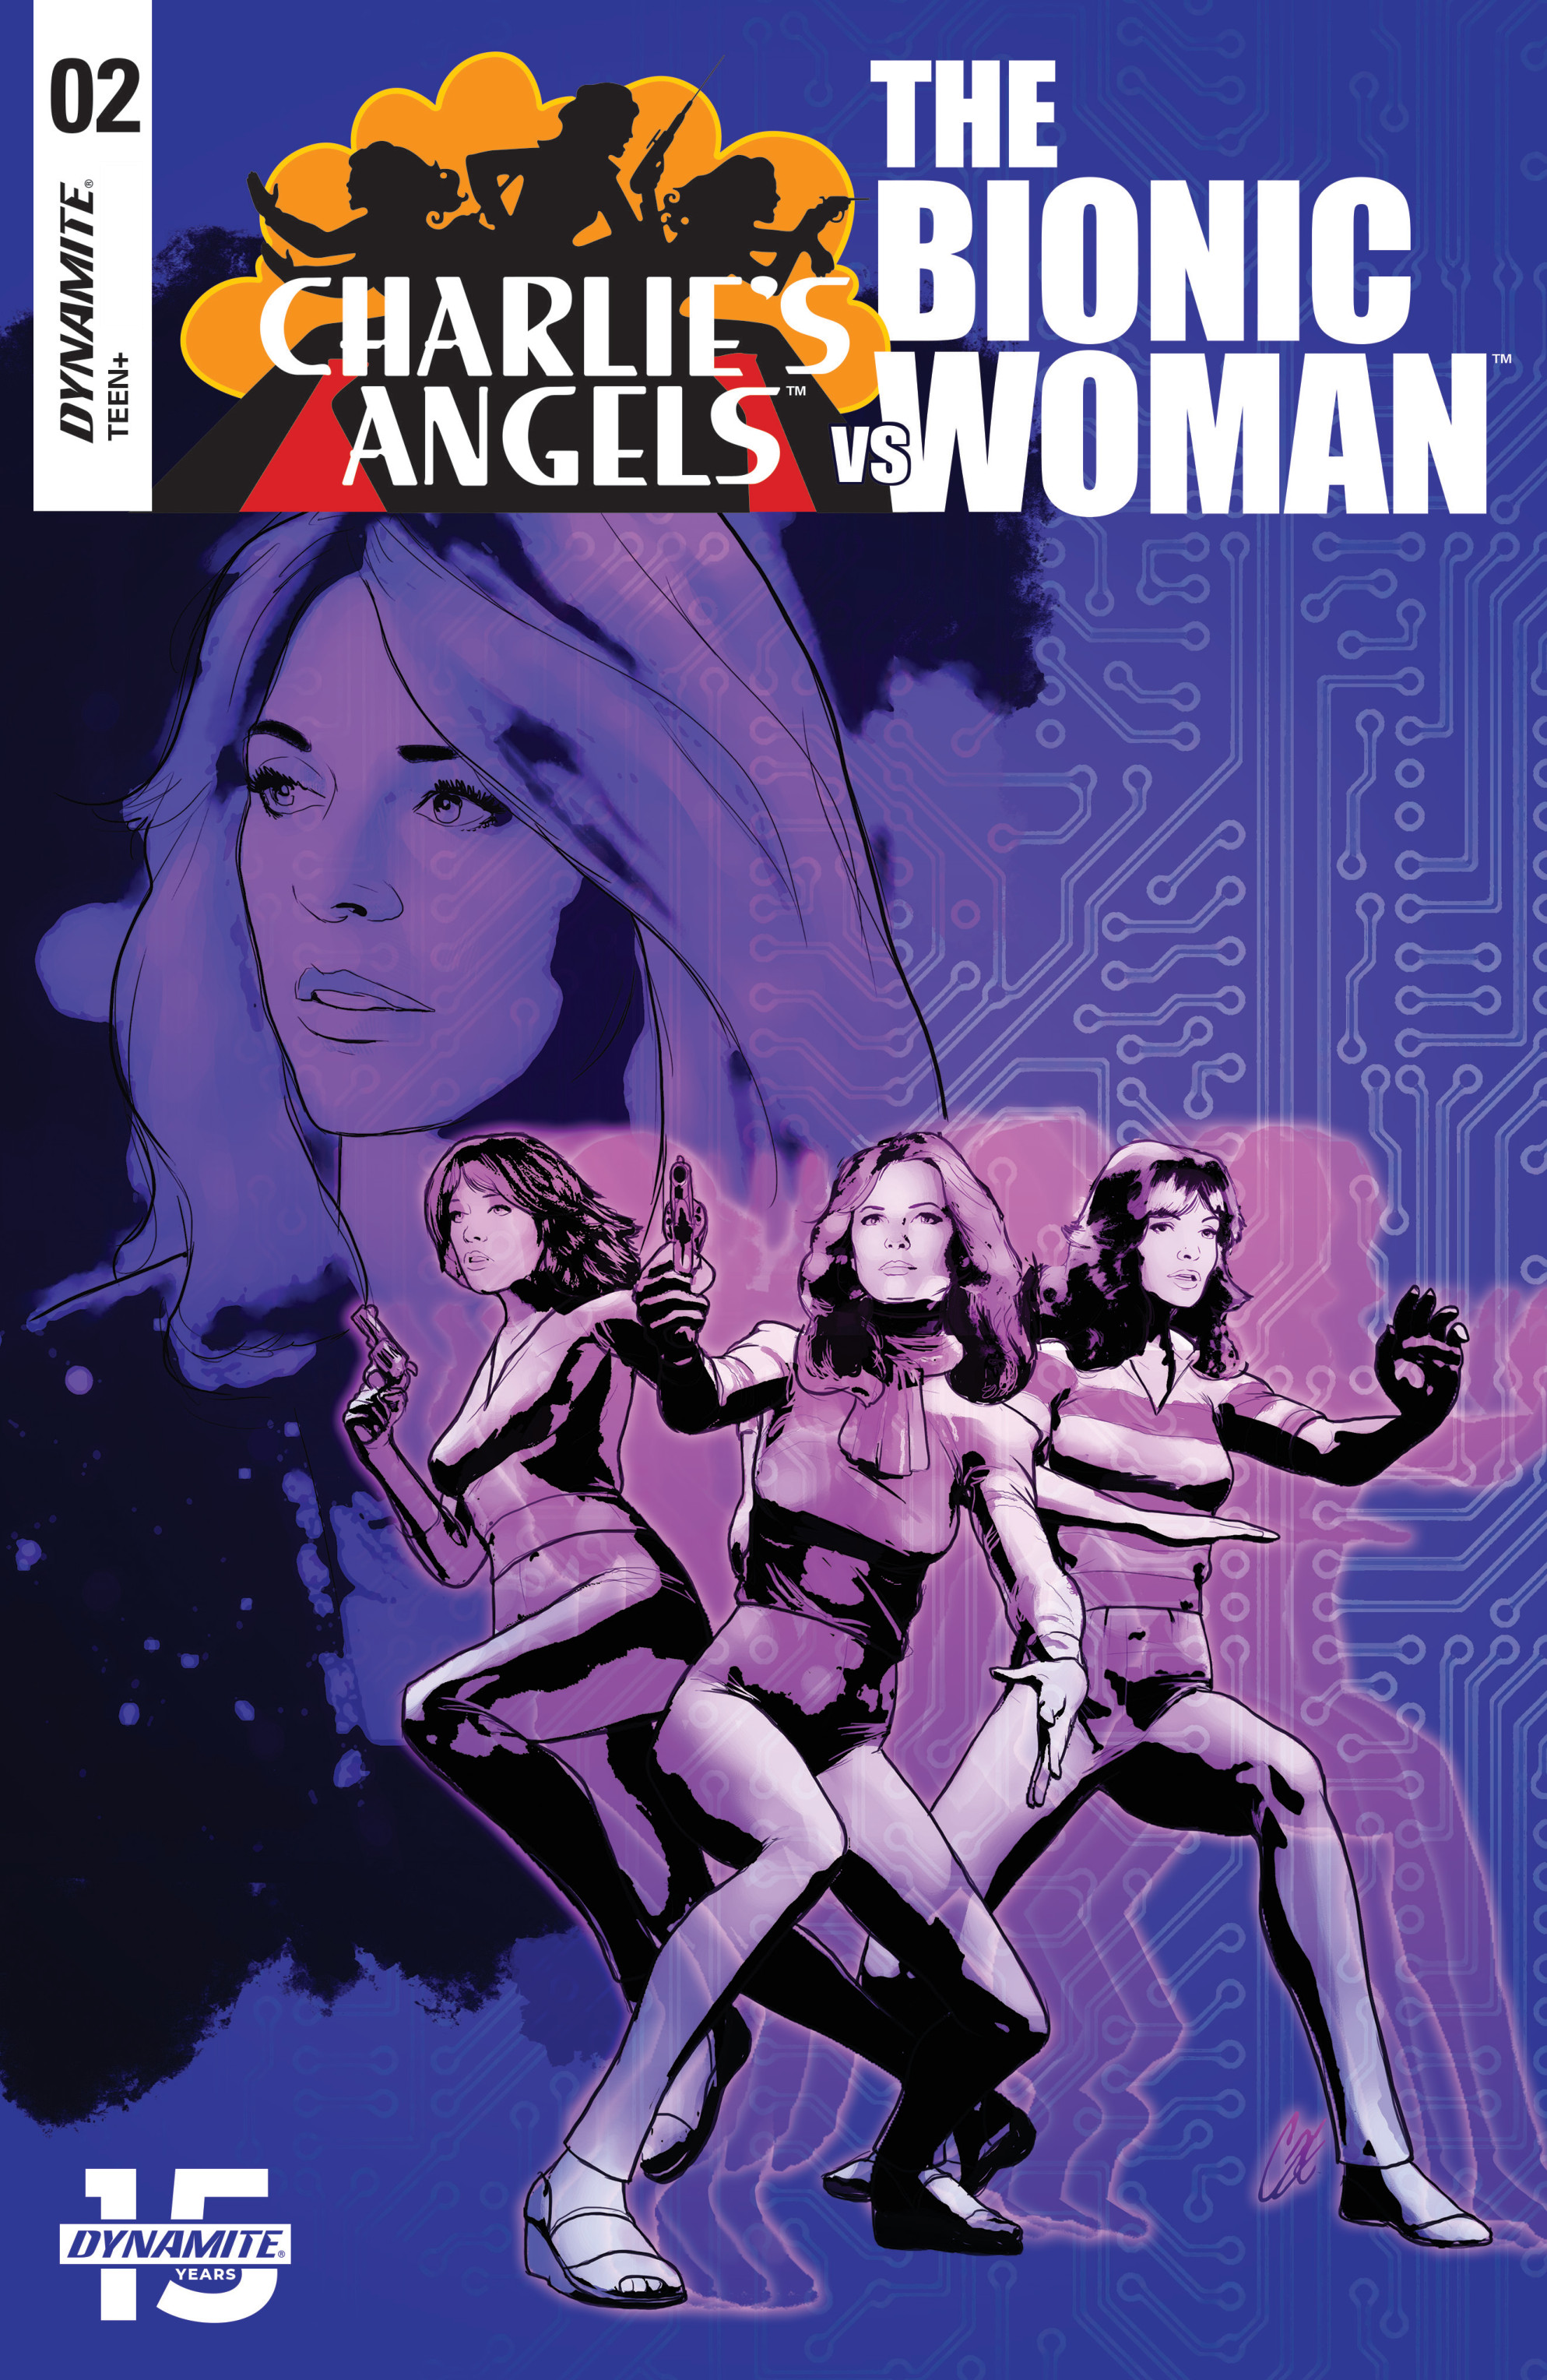 Charlie's Angels vs. The Bionic Woman (2019-): Chapter 2 - Page 1